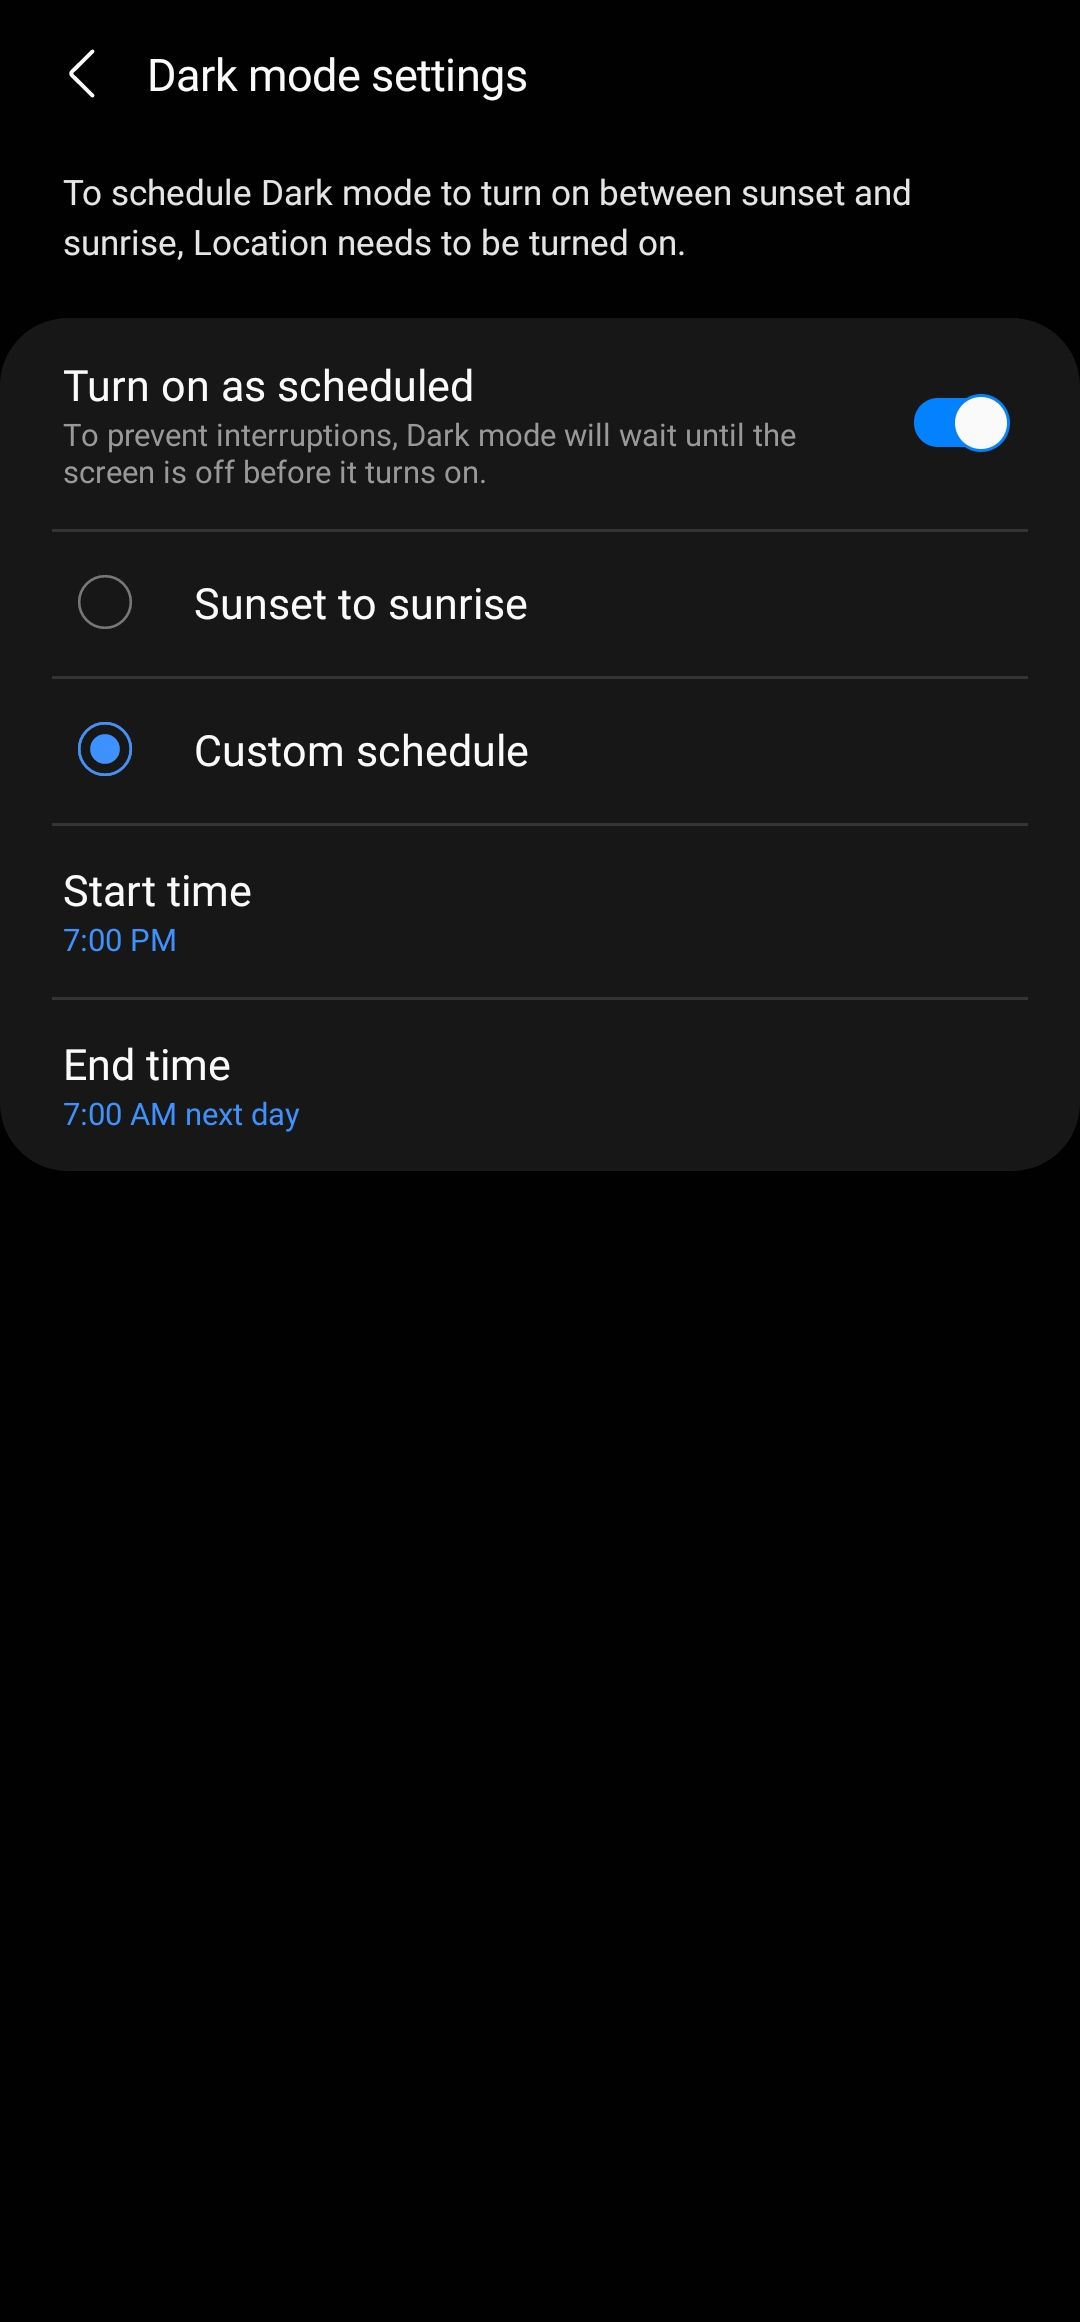 Use the custom schedule option to schedule dark mode on your Samsung phone